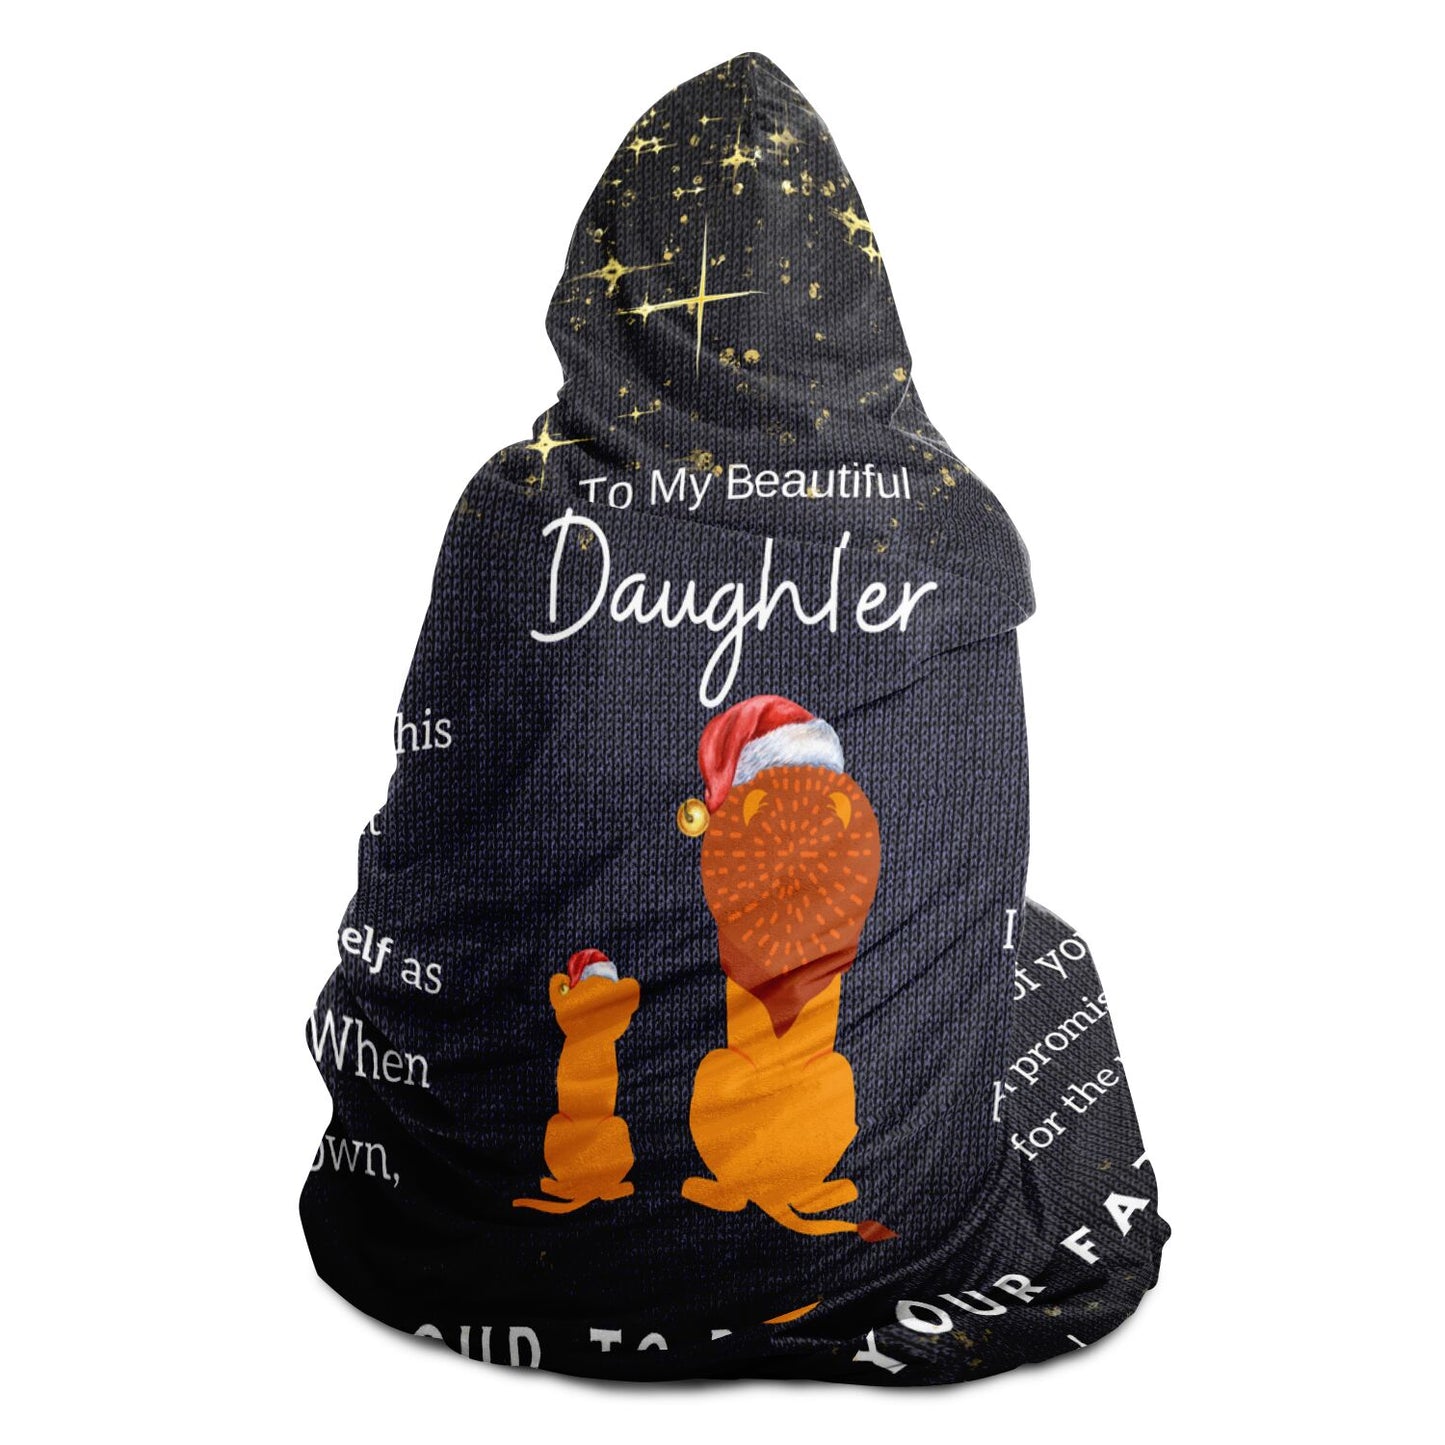 (Premium Sherpa Hooded Blanket) To My Daughter - I'm Proud To Be Your Father